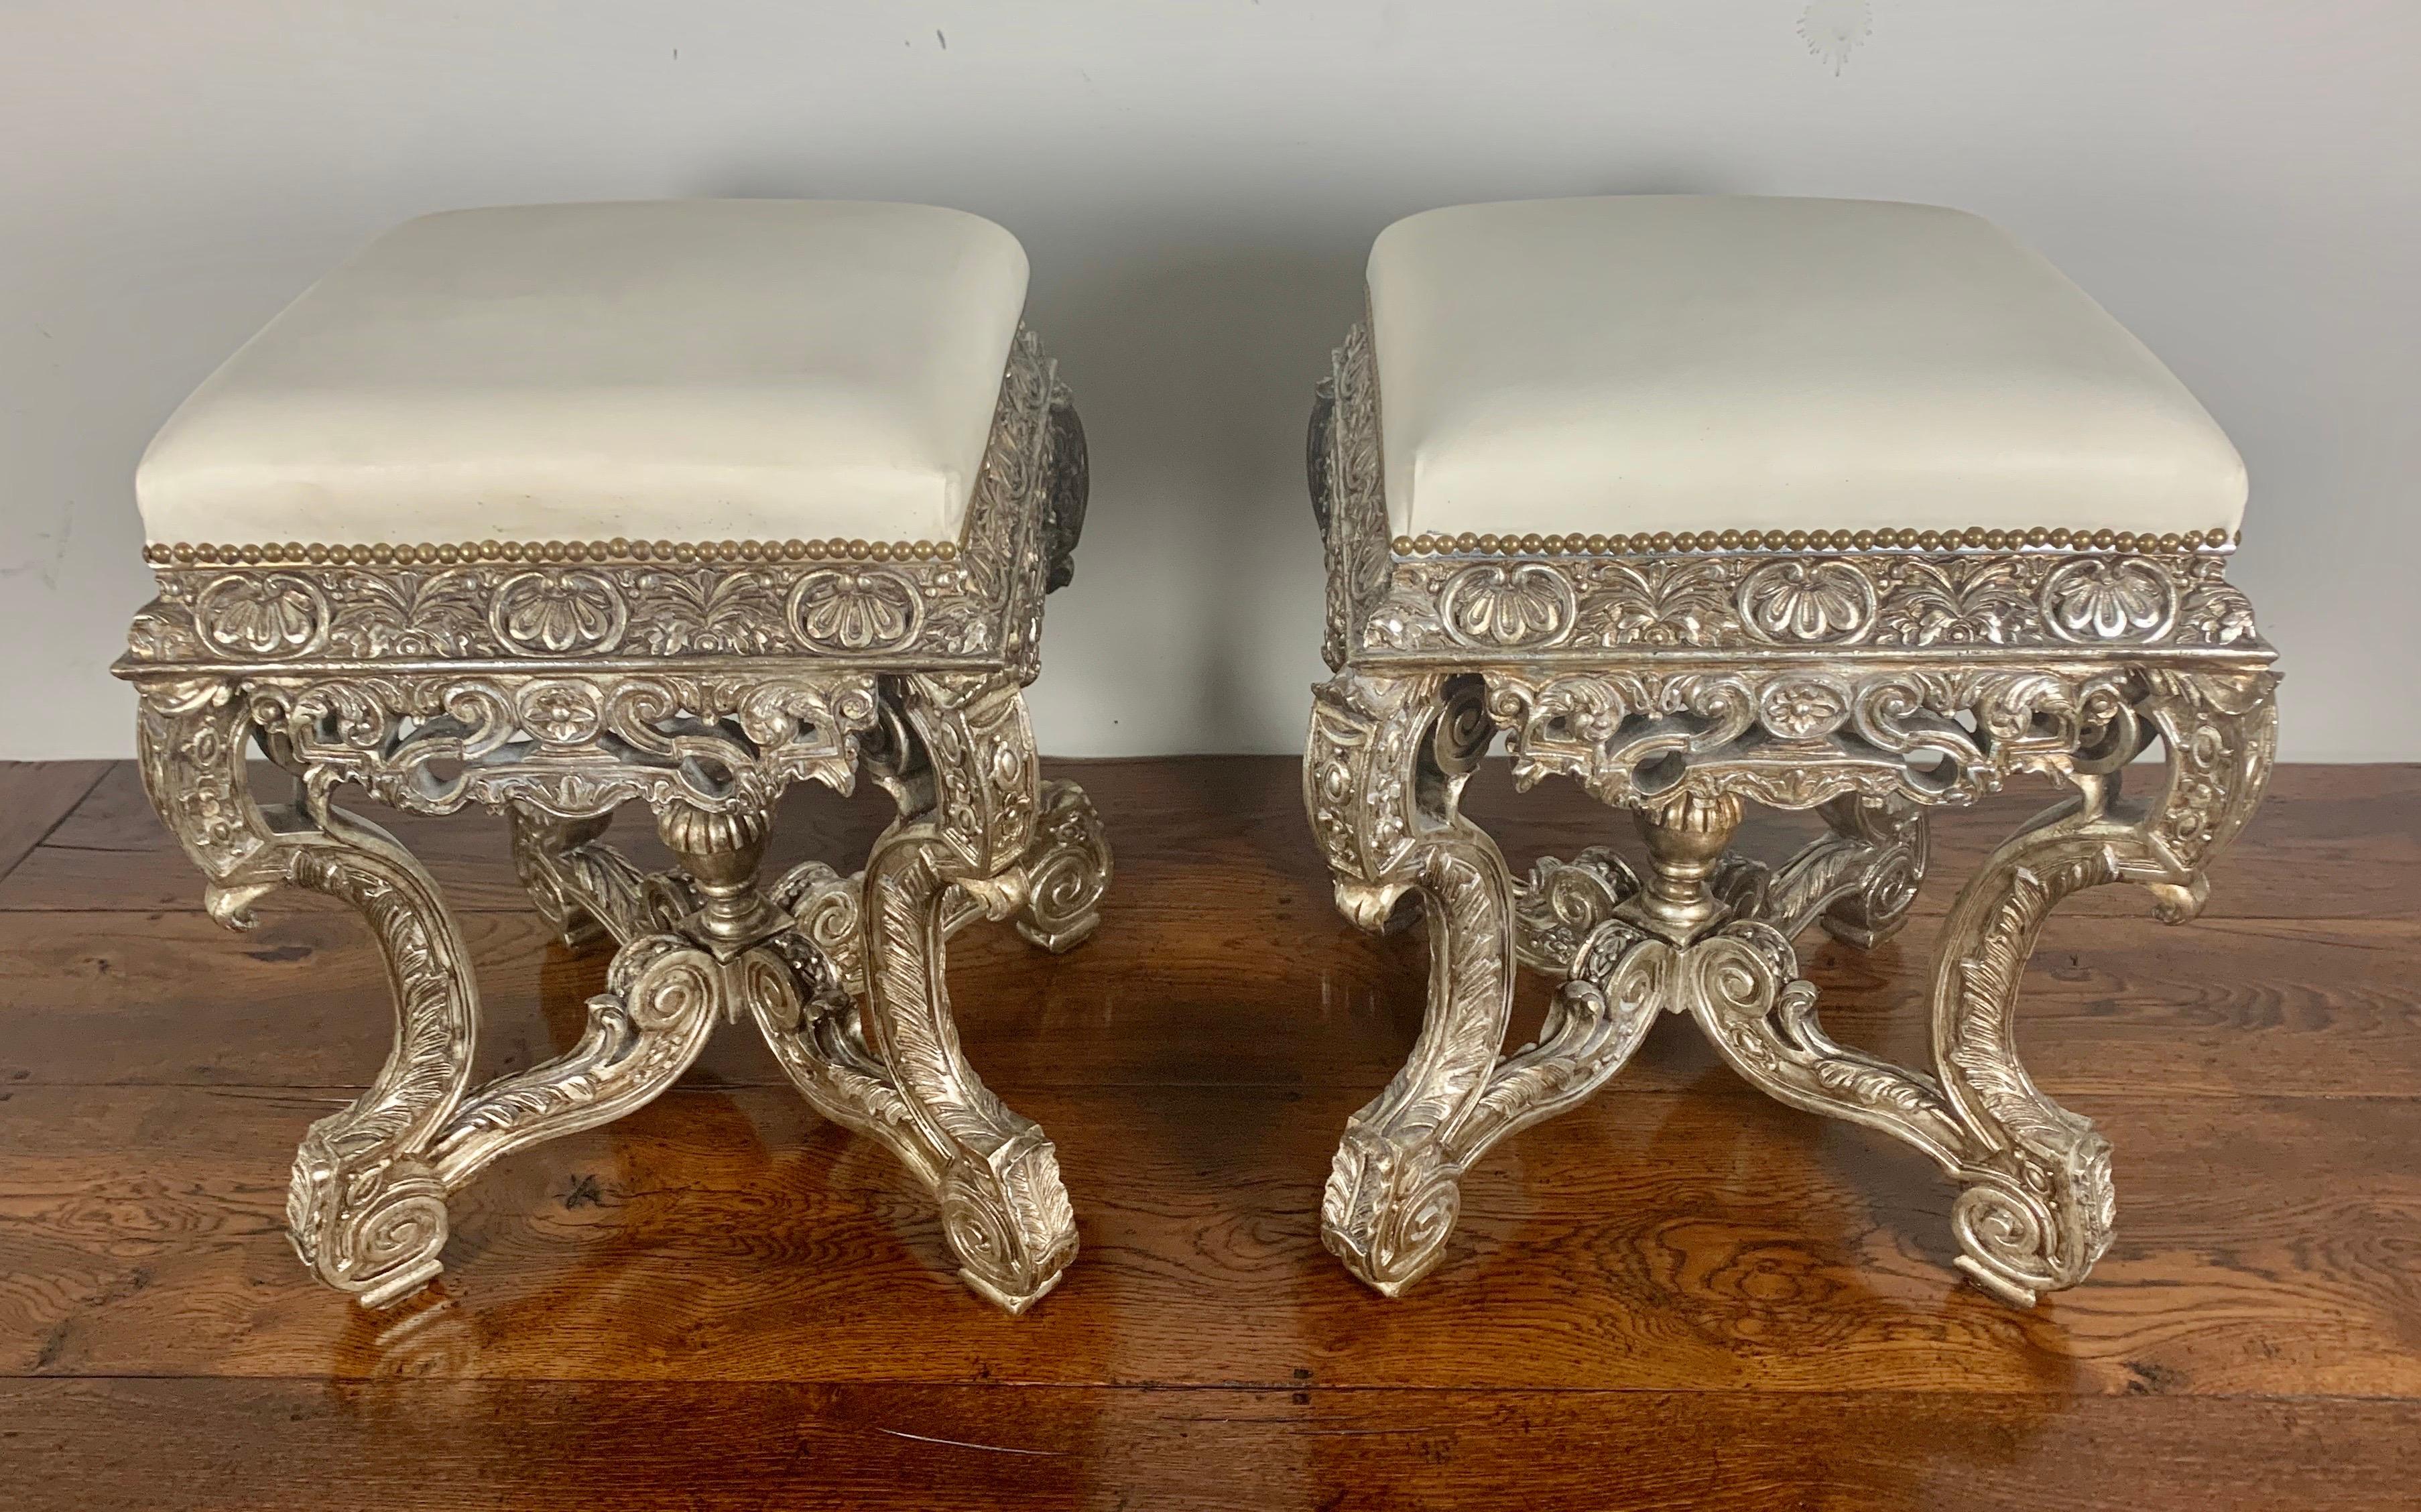 Pair of French carved silver gilt benches with white leather upholstery and nailhead trim detail.